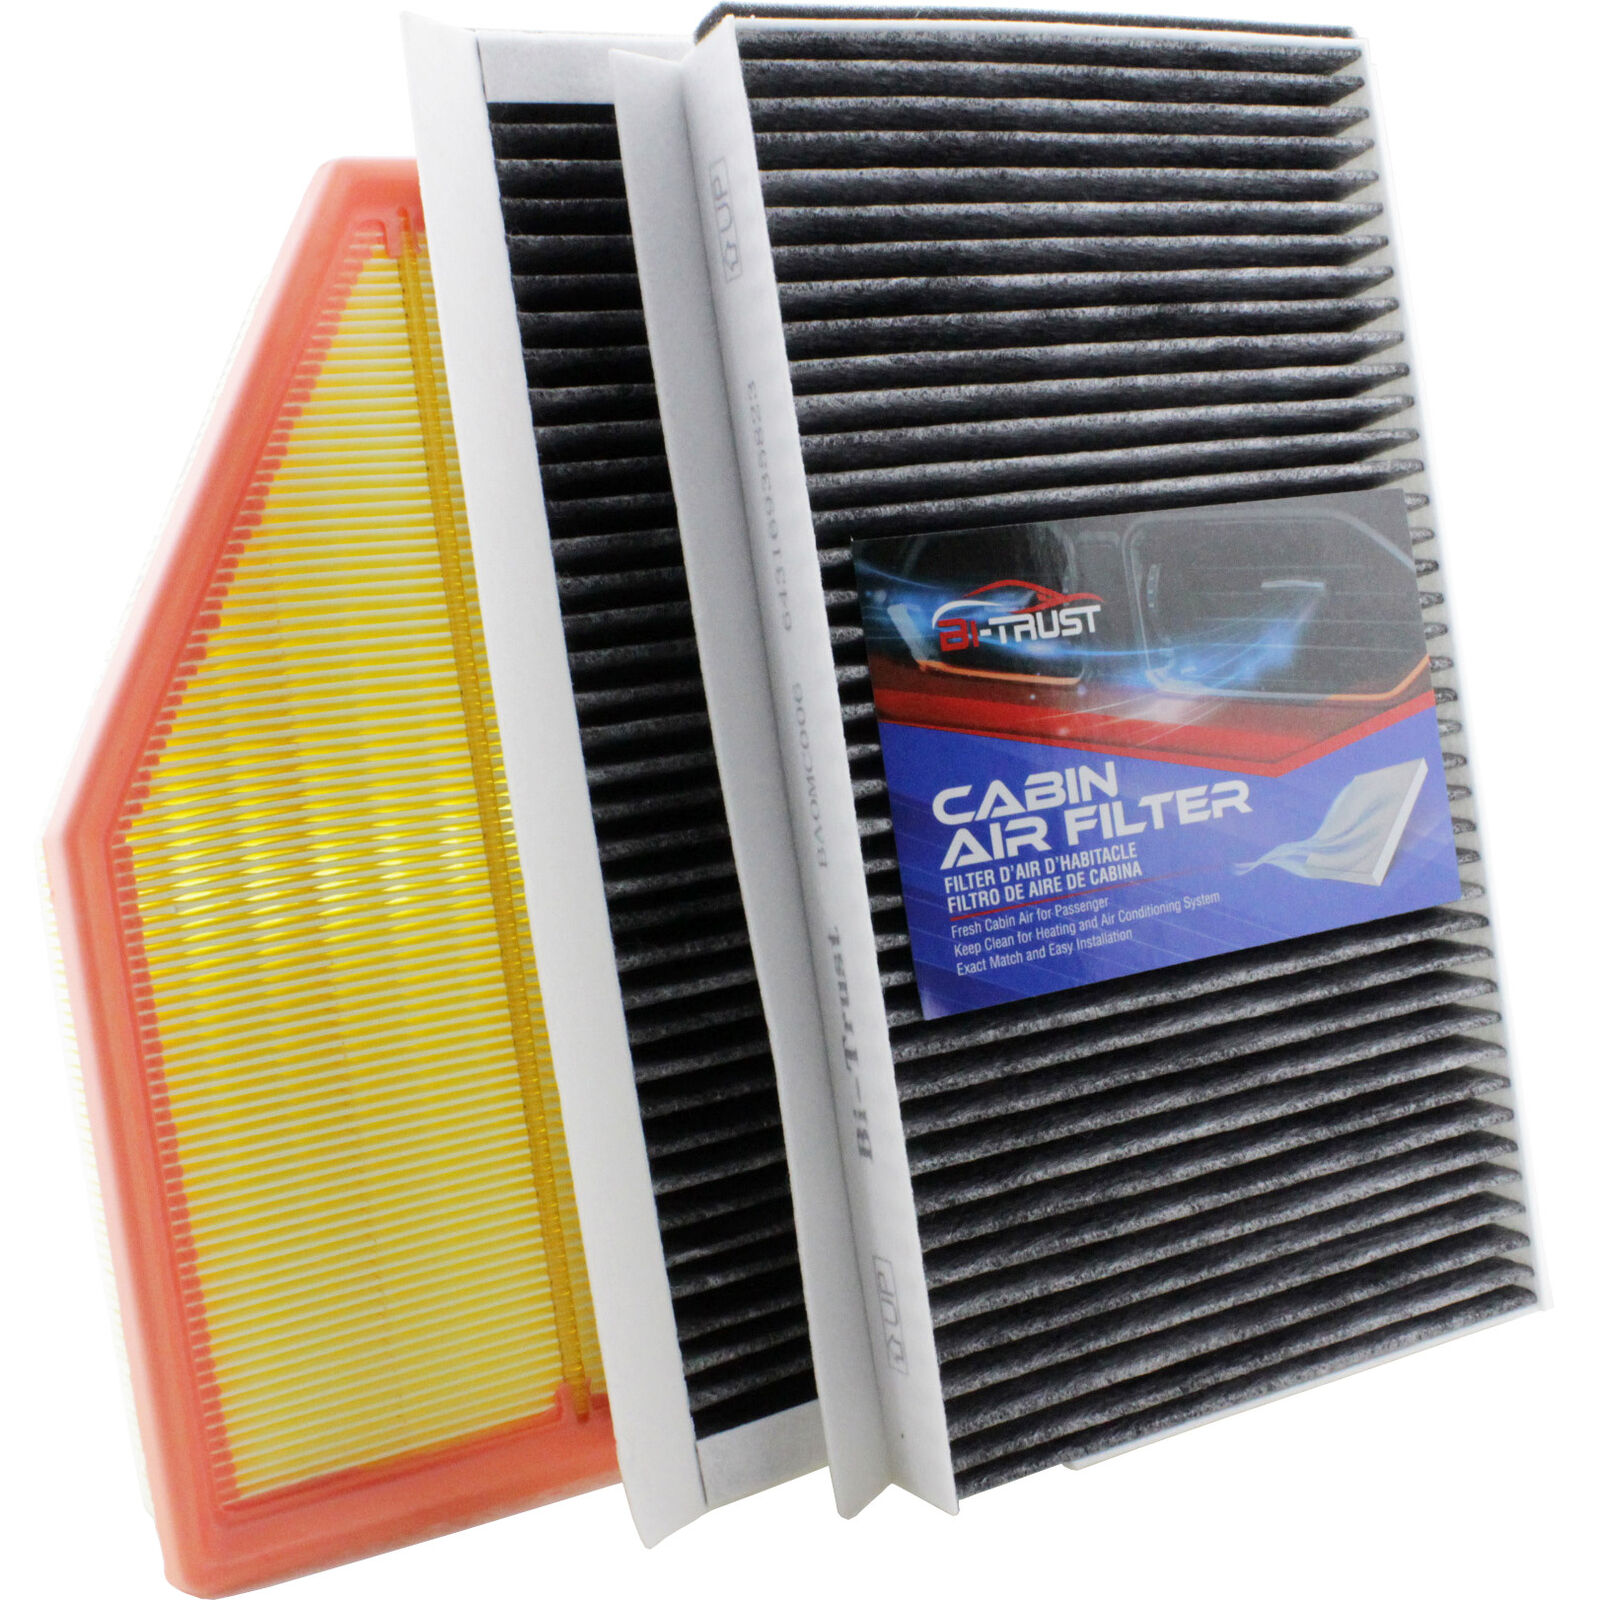 Engine and Cabin Air Filter Kit for BMW 525I 525XI 528I 528XI 530I 530XI 545I